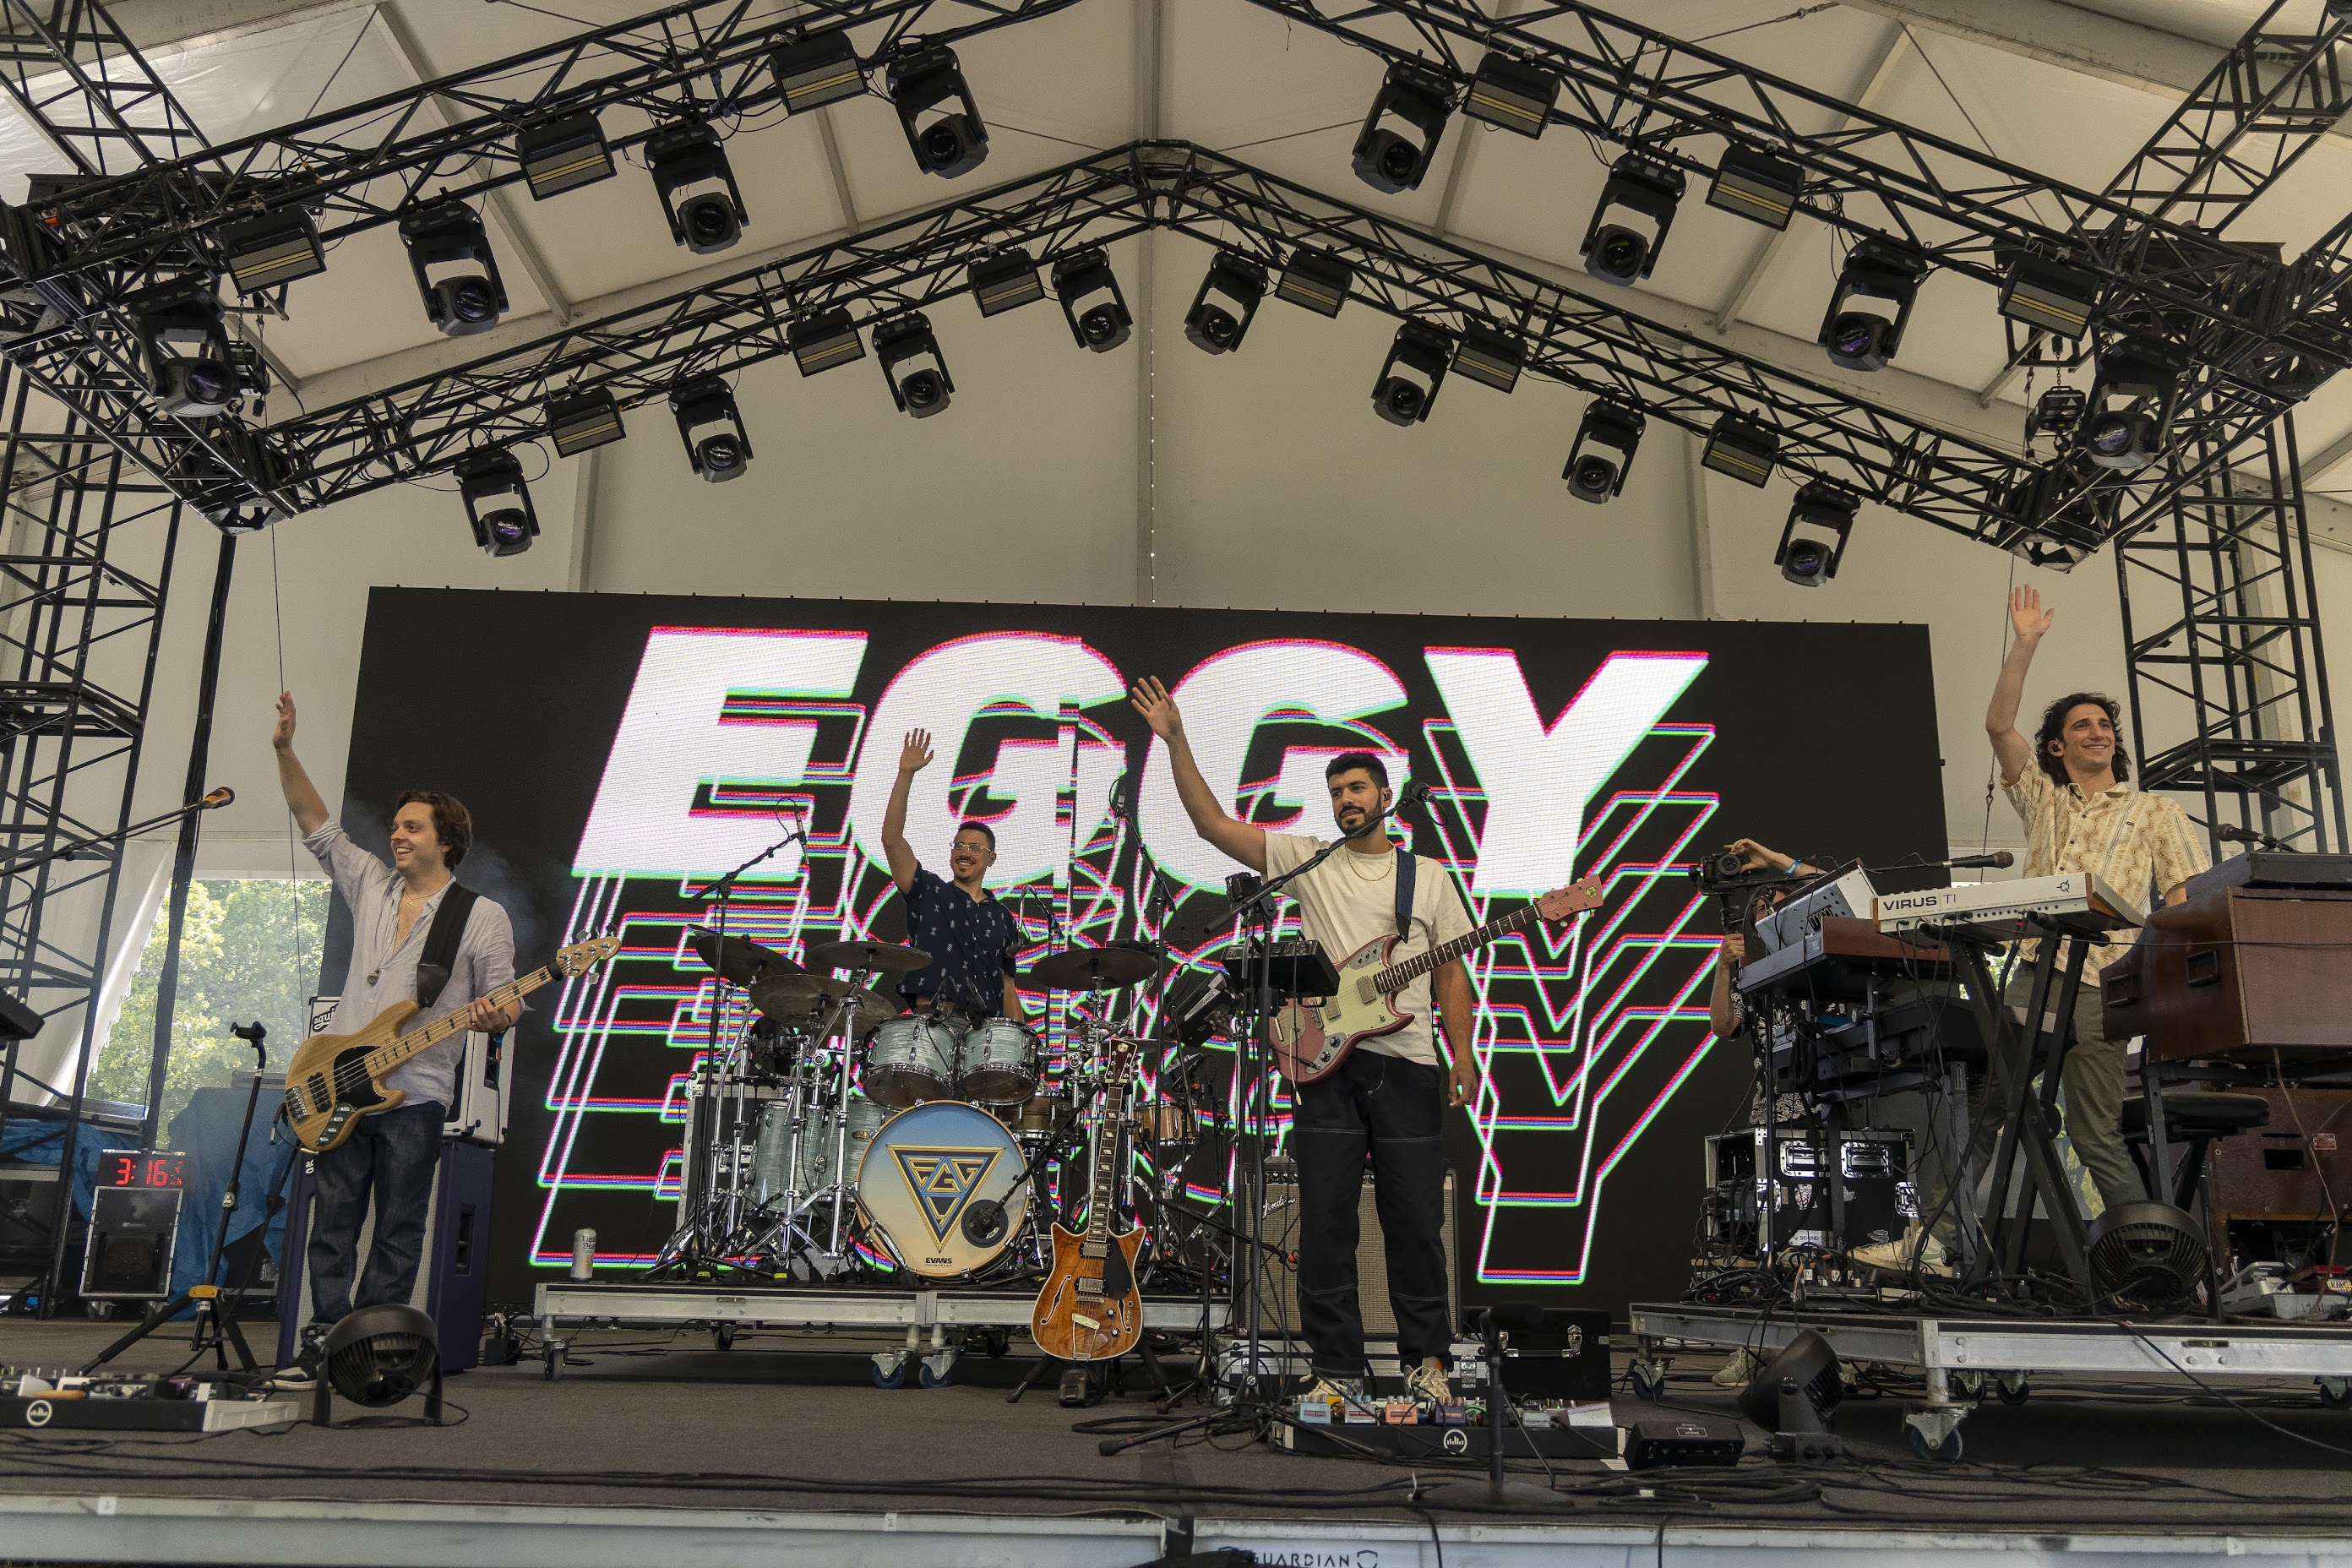 Eggy after their great set at Bonnaroo